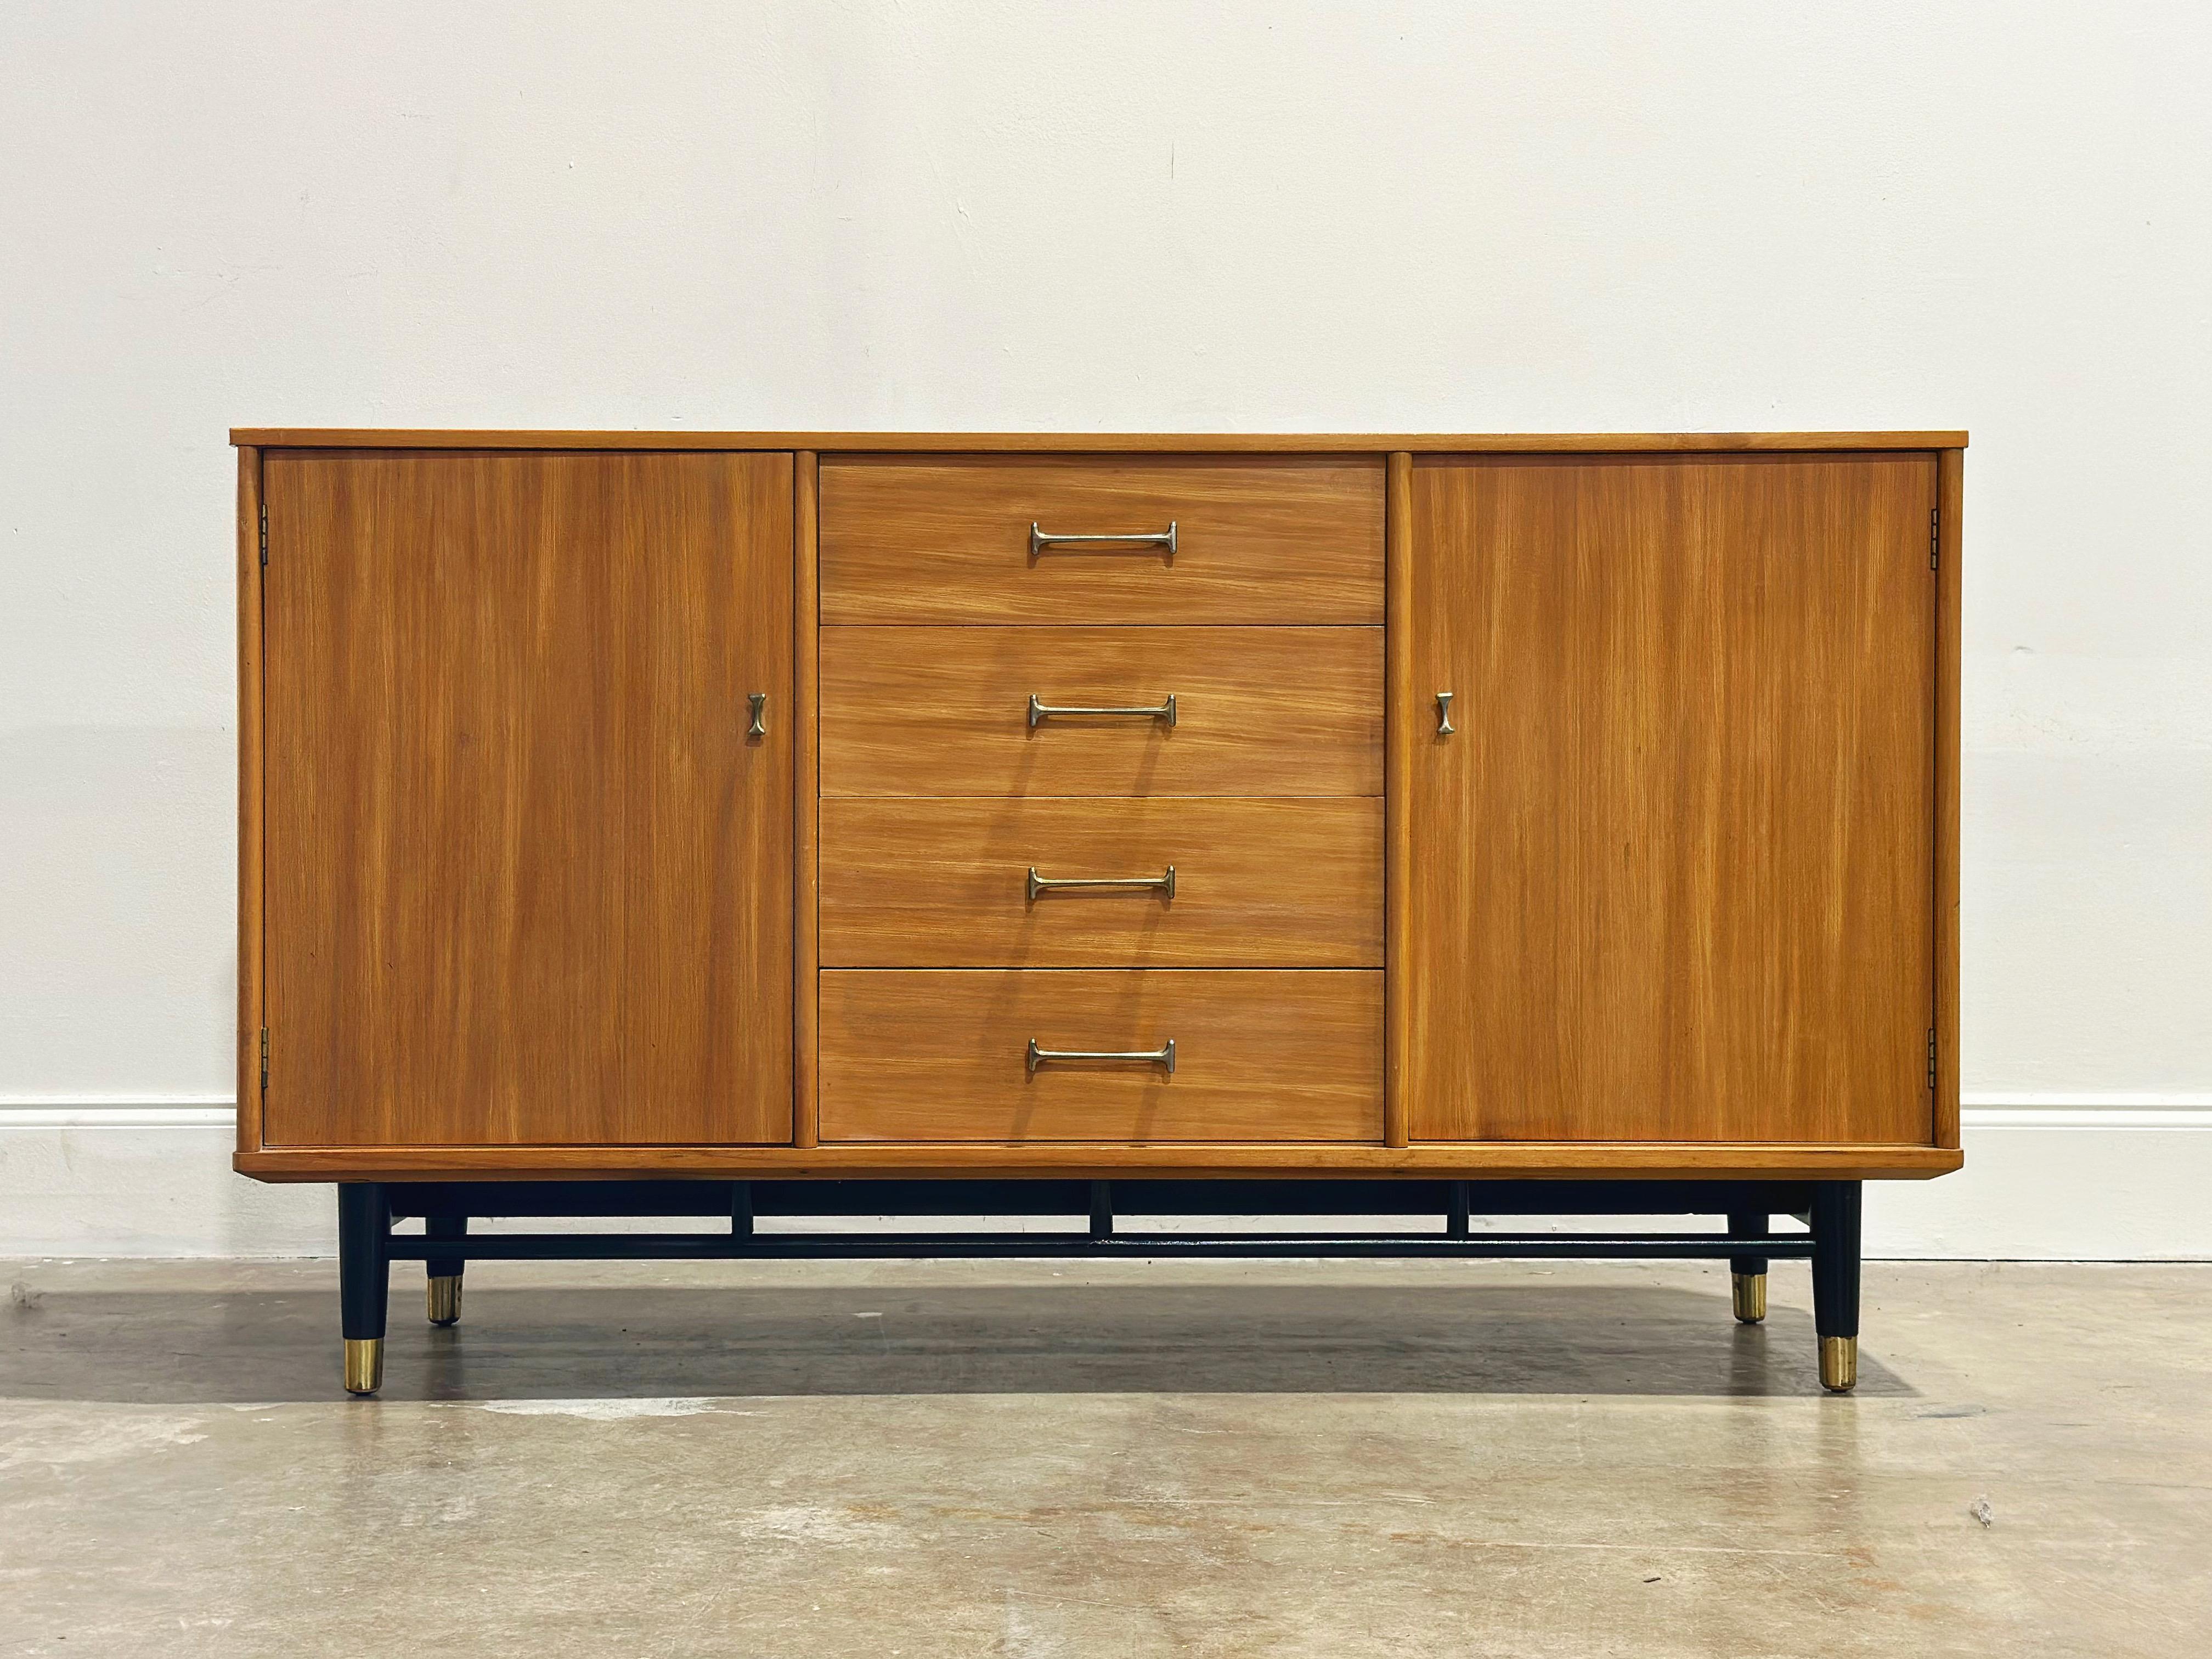 North American Milo Baughman for Drexel - Credenza - Midcentury Modern - Today's Living